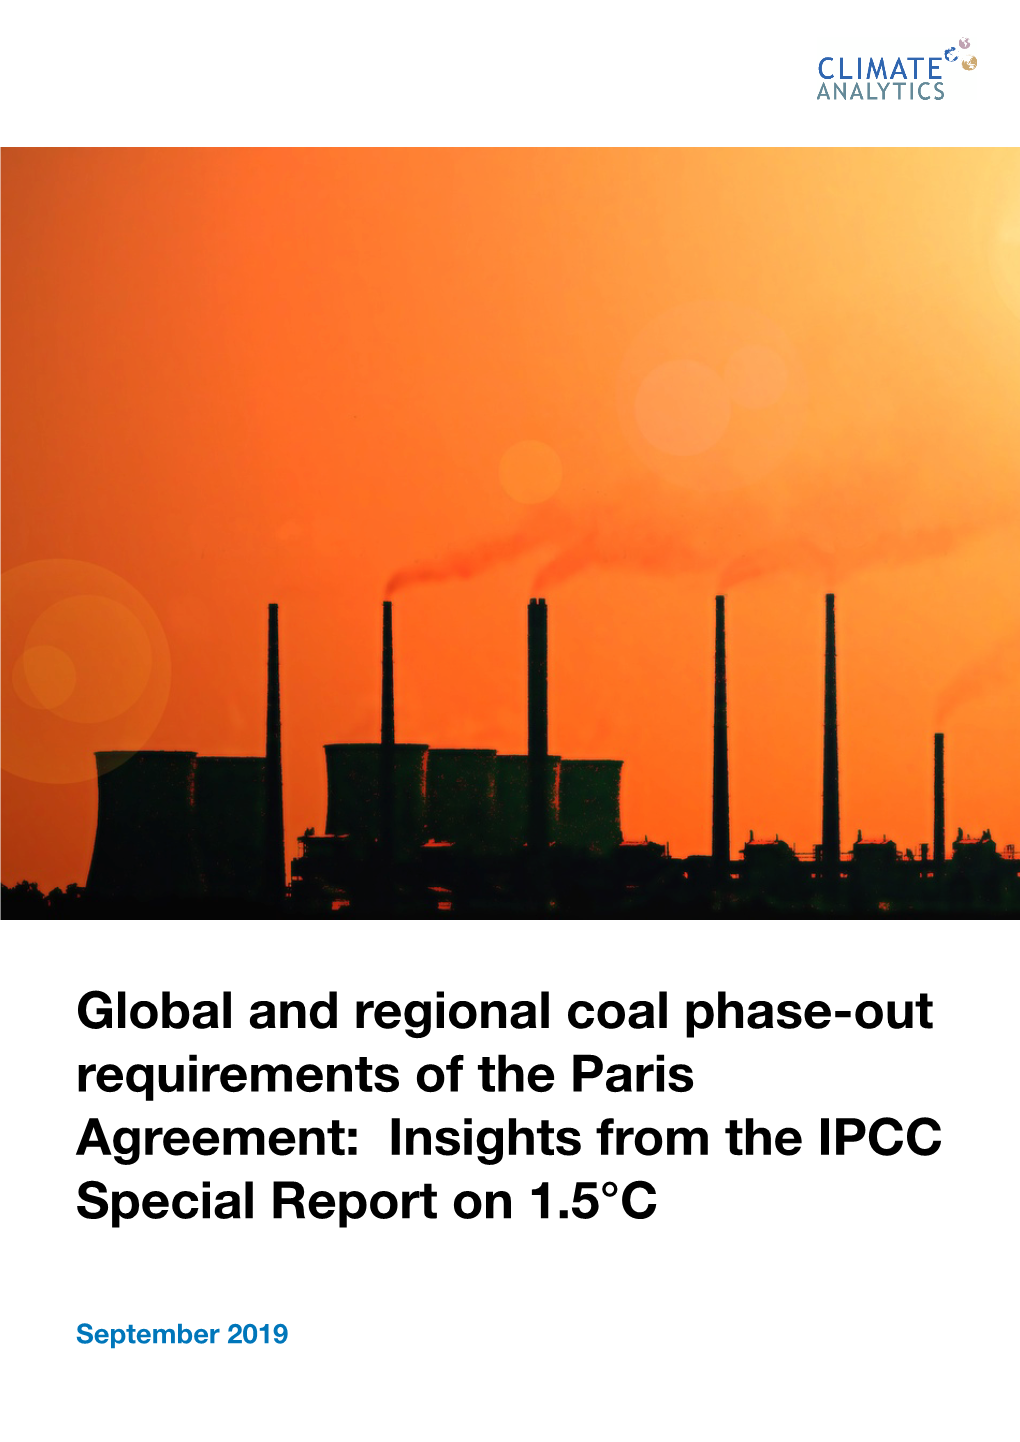 Global and Regional Coal Phase-Out Requirements of the Paris Agreement: Insights from the IPCC Special Report on 1.5°C